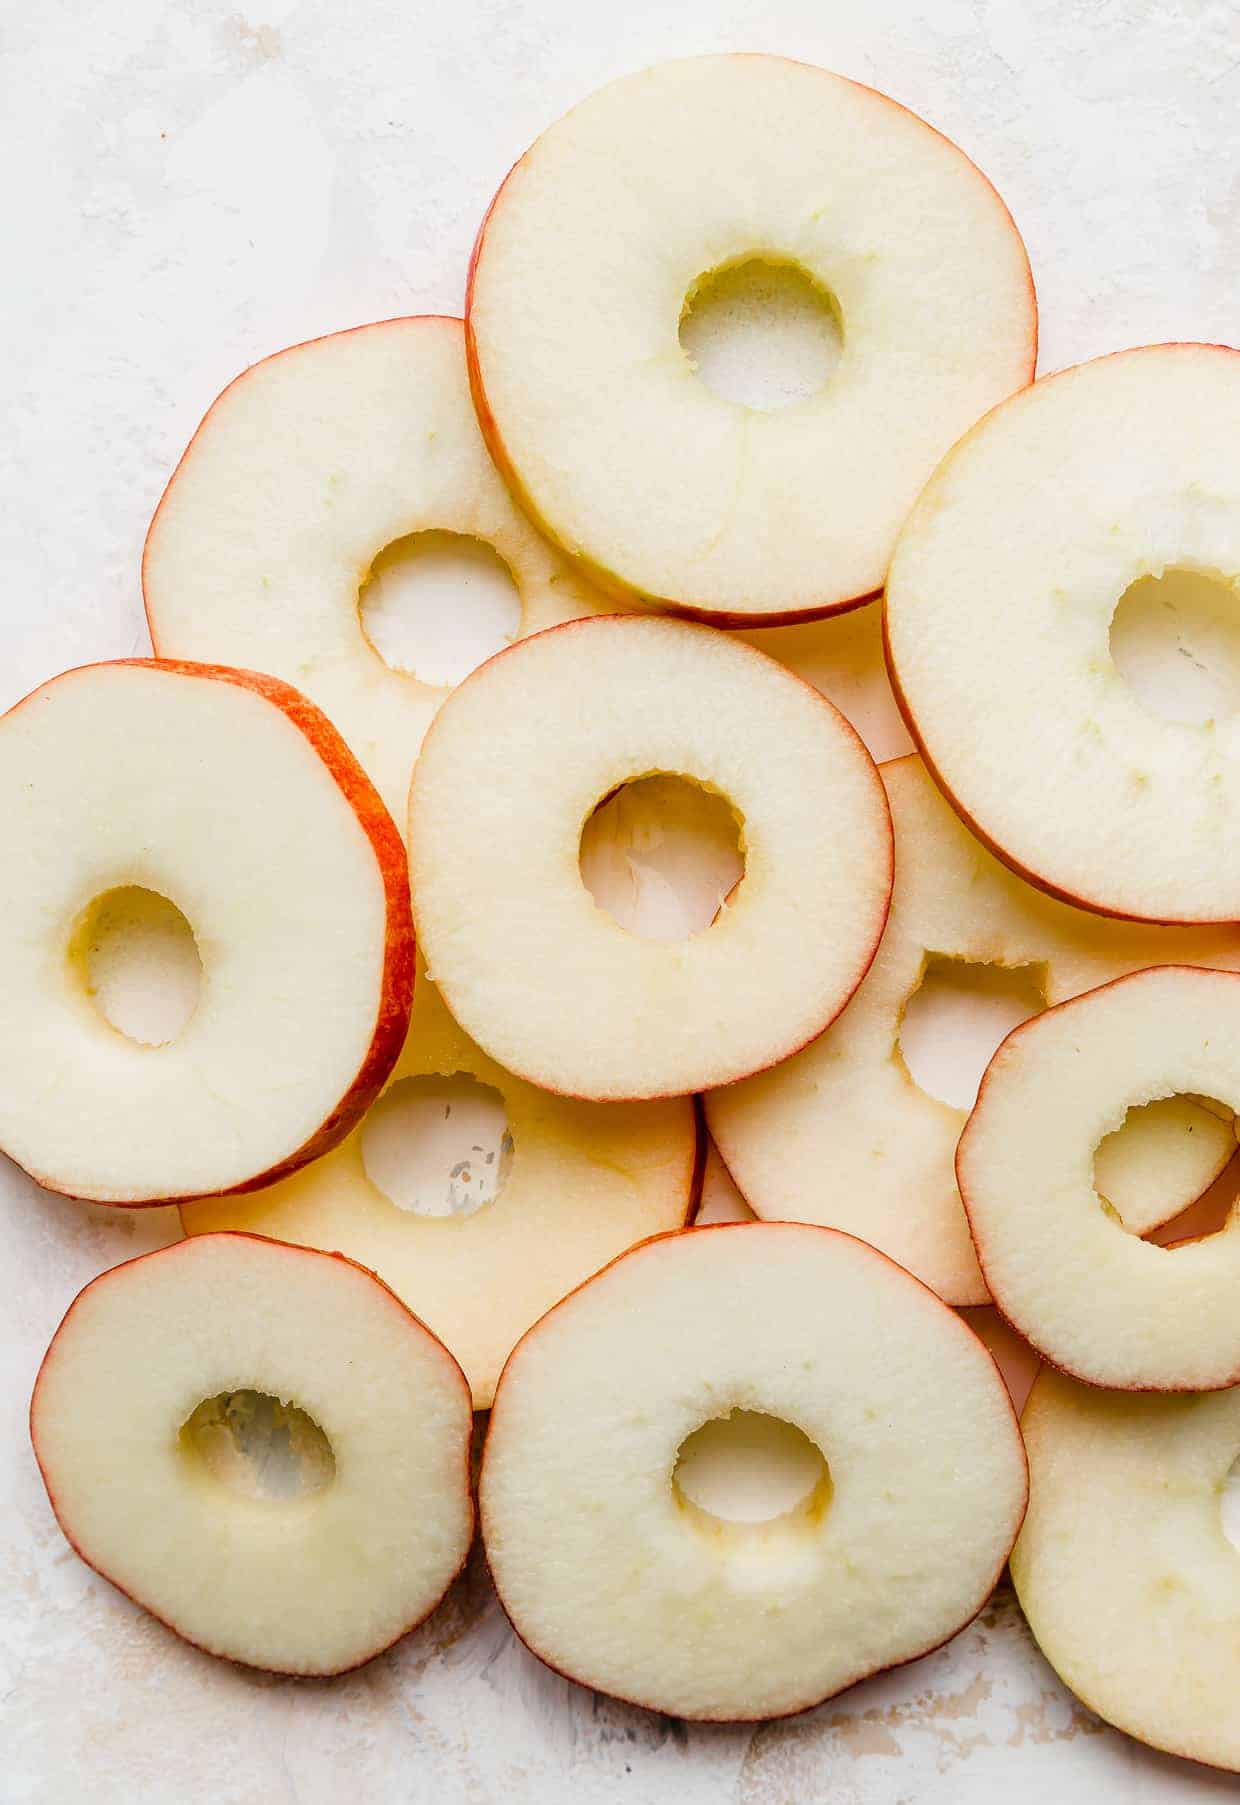 An apple sliced into rounds, looking like "donuts".